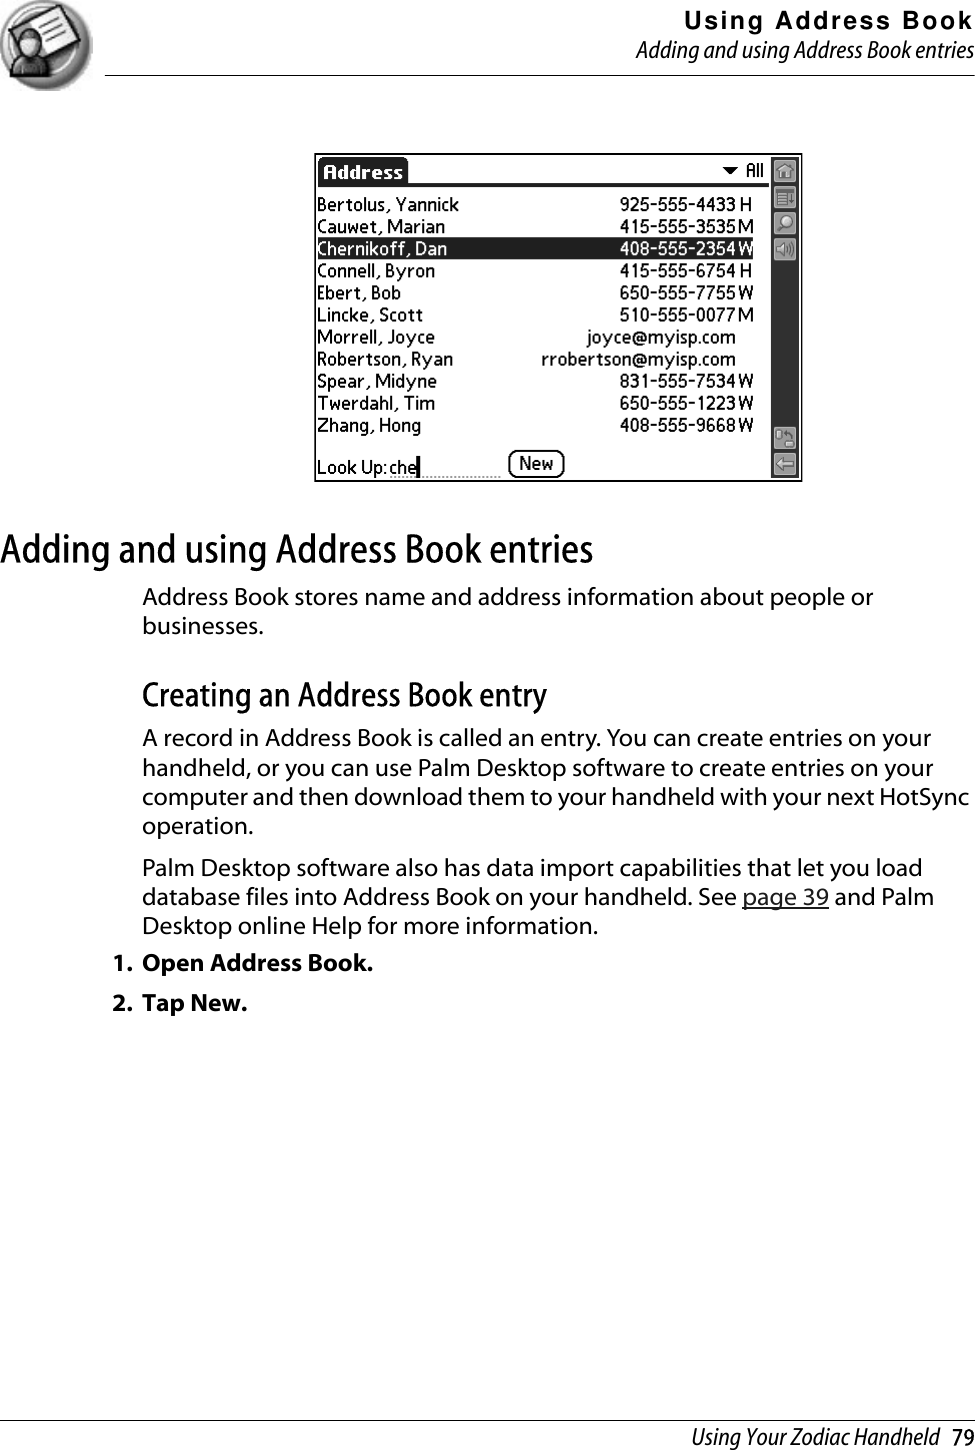 Using Address BookAdding and using Address Book entriesUsing Your Zodiac Handheld   79Adding and using Address Book entriesAddress Book stores name and address information about people or businesses.Creating an Address Book entryA record in Address Book is called an entry. You can create entries on your handheld, or you can use Palm Desktop software to create entries on your computer and then download them to your handheld with your next HotSync operation.Palm Desktop software also has data import capabilities that let you load database files into Address Book on your handheld. See page 39 and Palm Desktop online Help for more information.1. Open Address Book.2. Tap New.